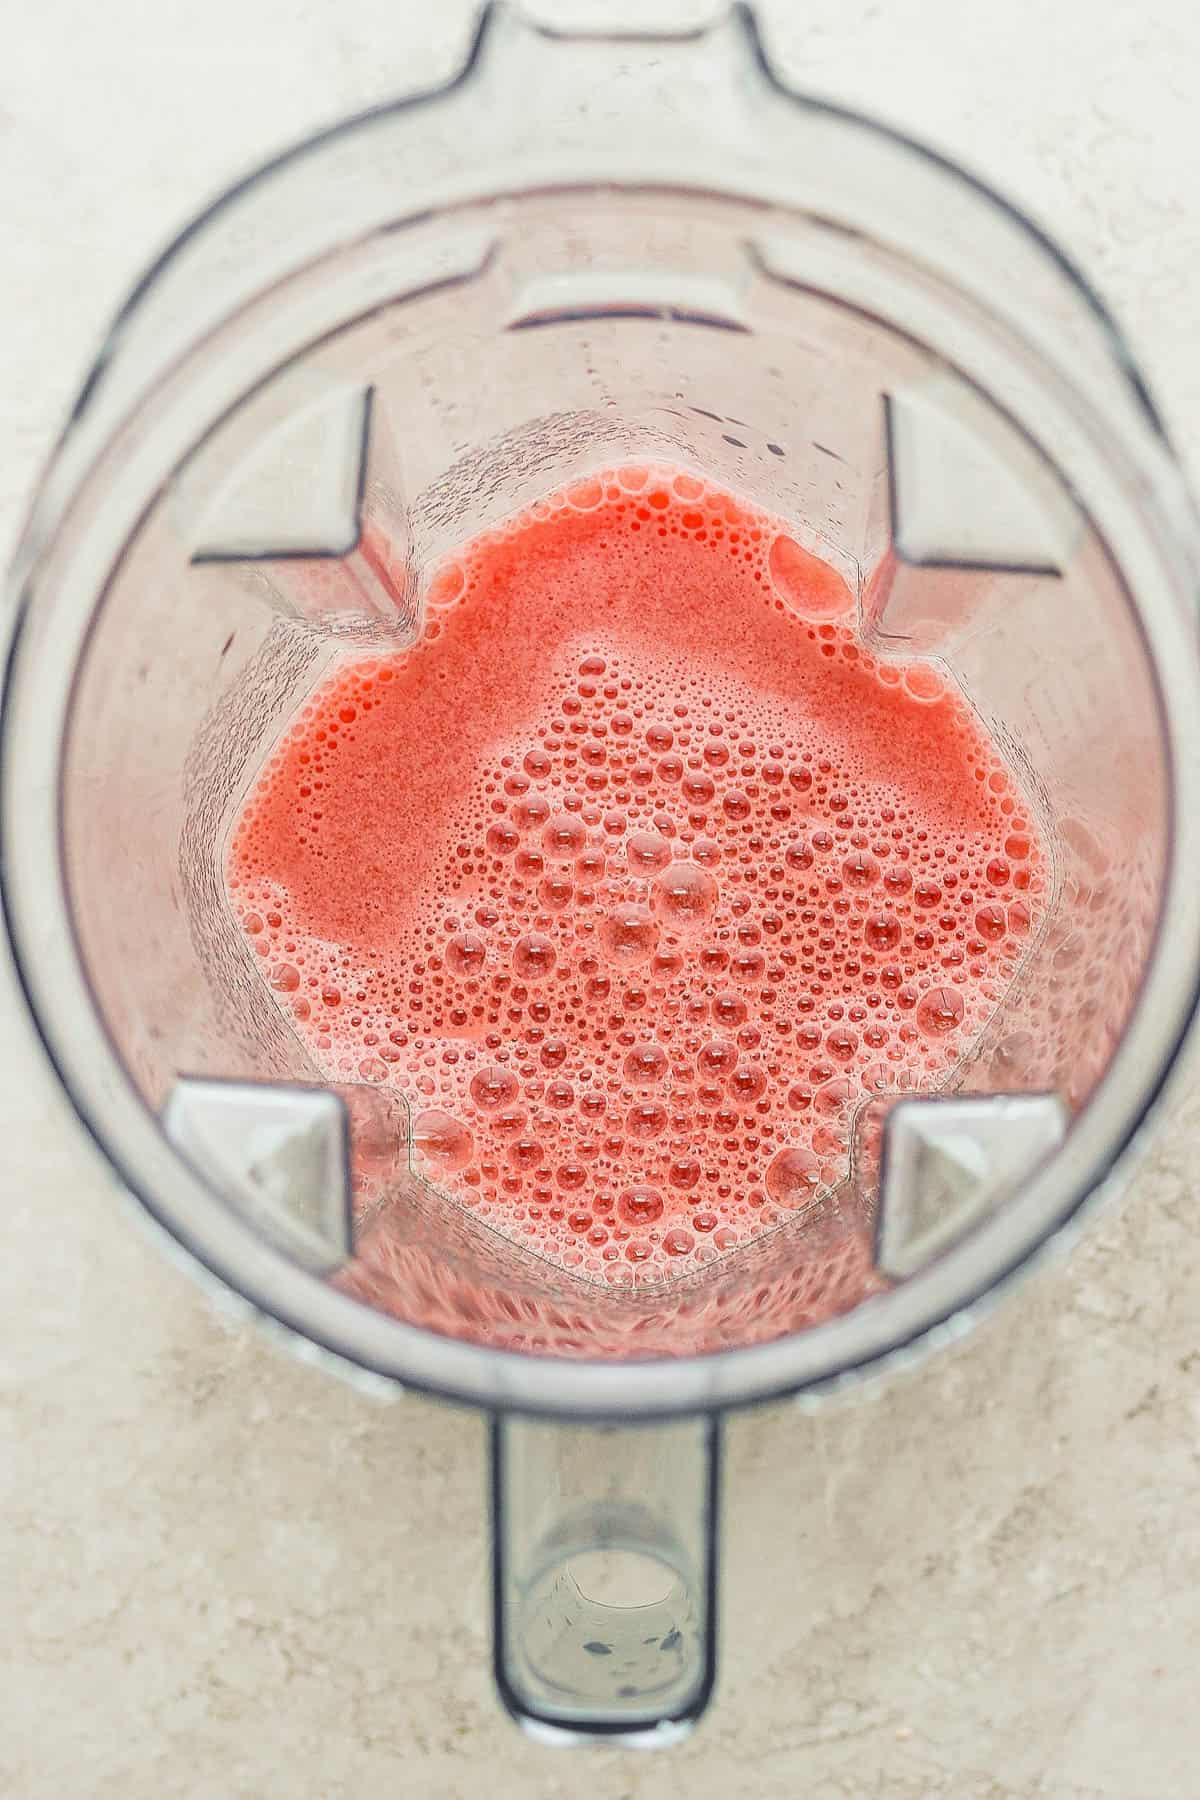 A blended watermelon cocktail in a blender.